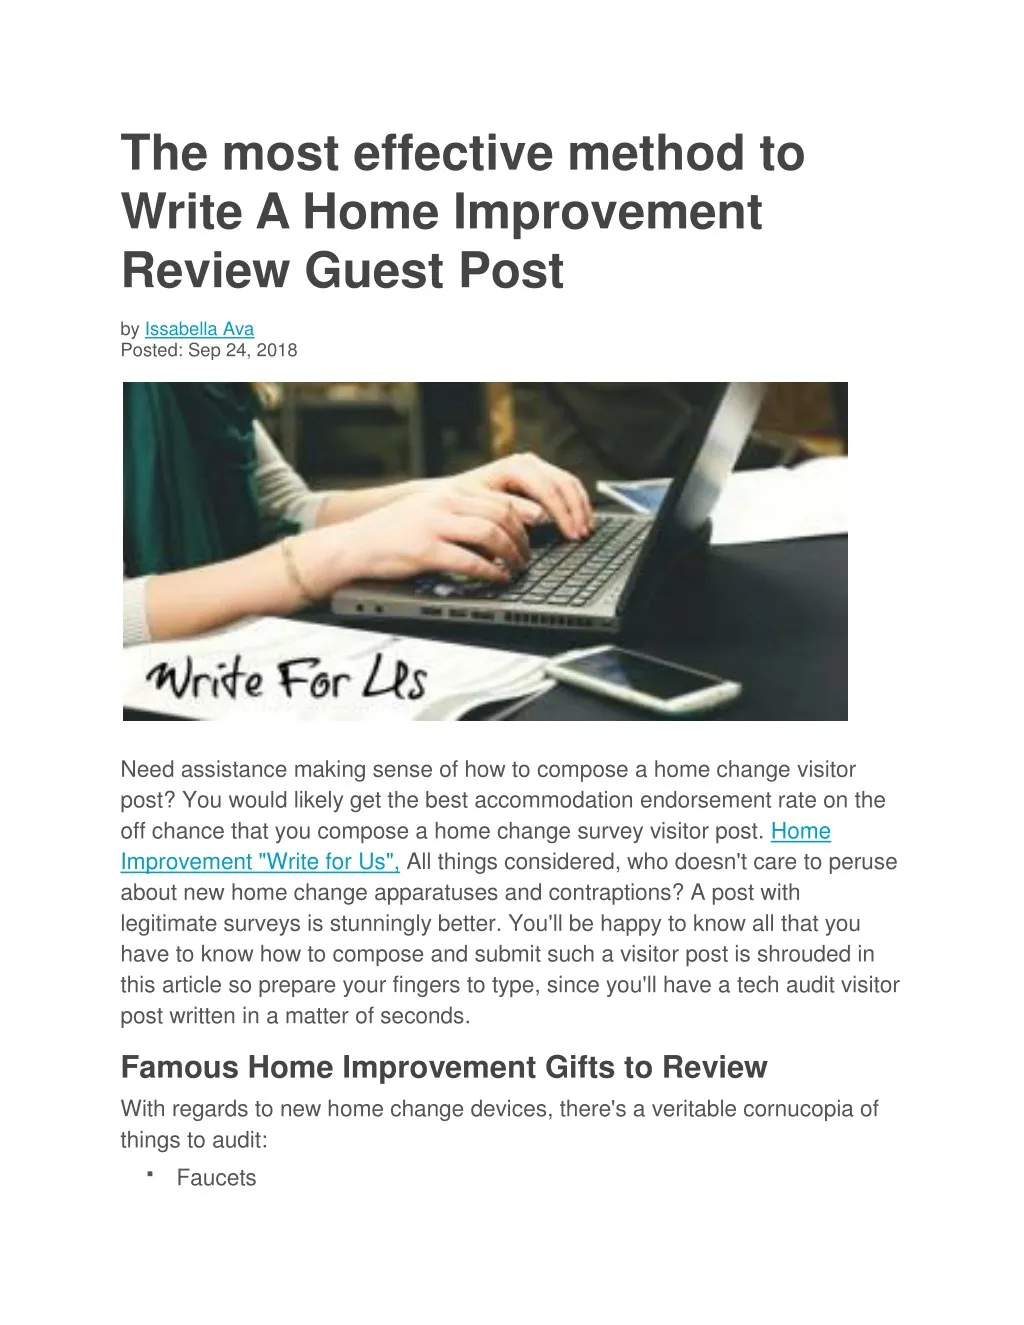 the most effective method to write a home